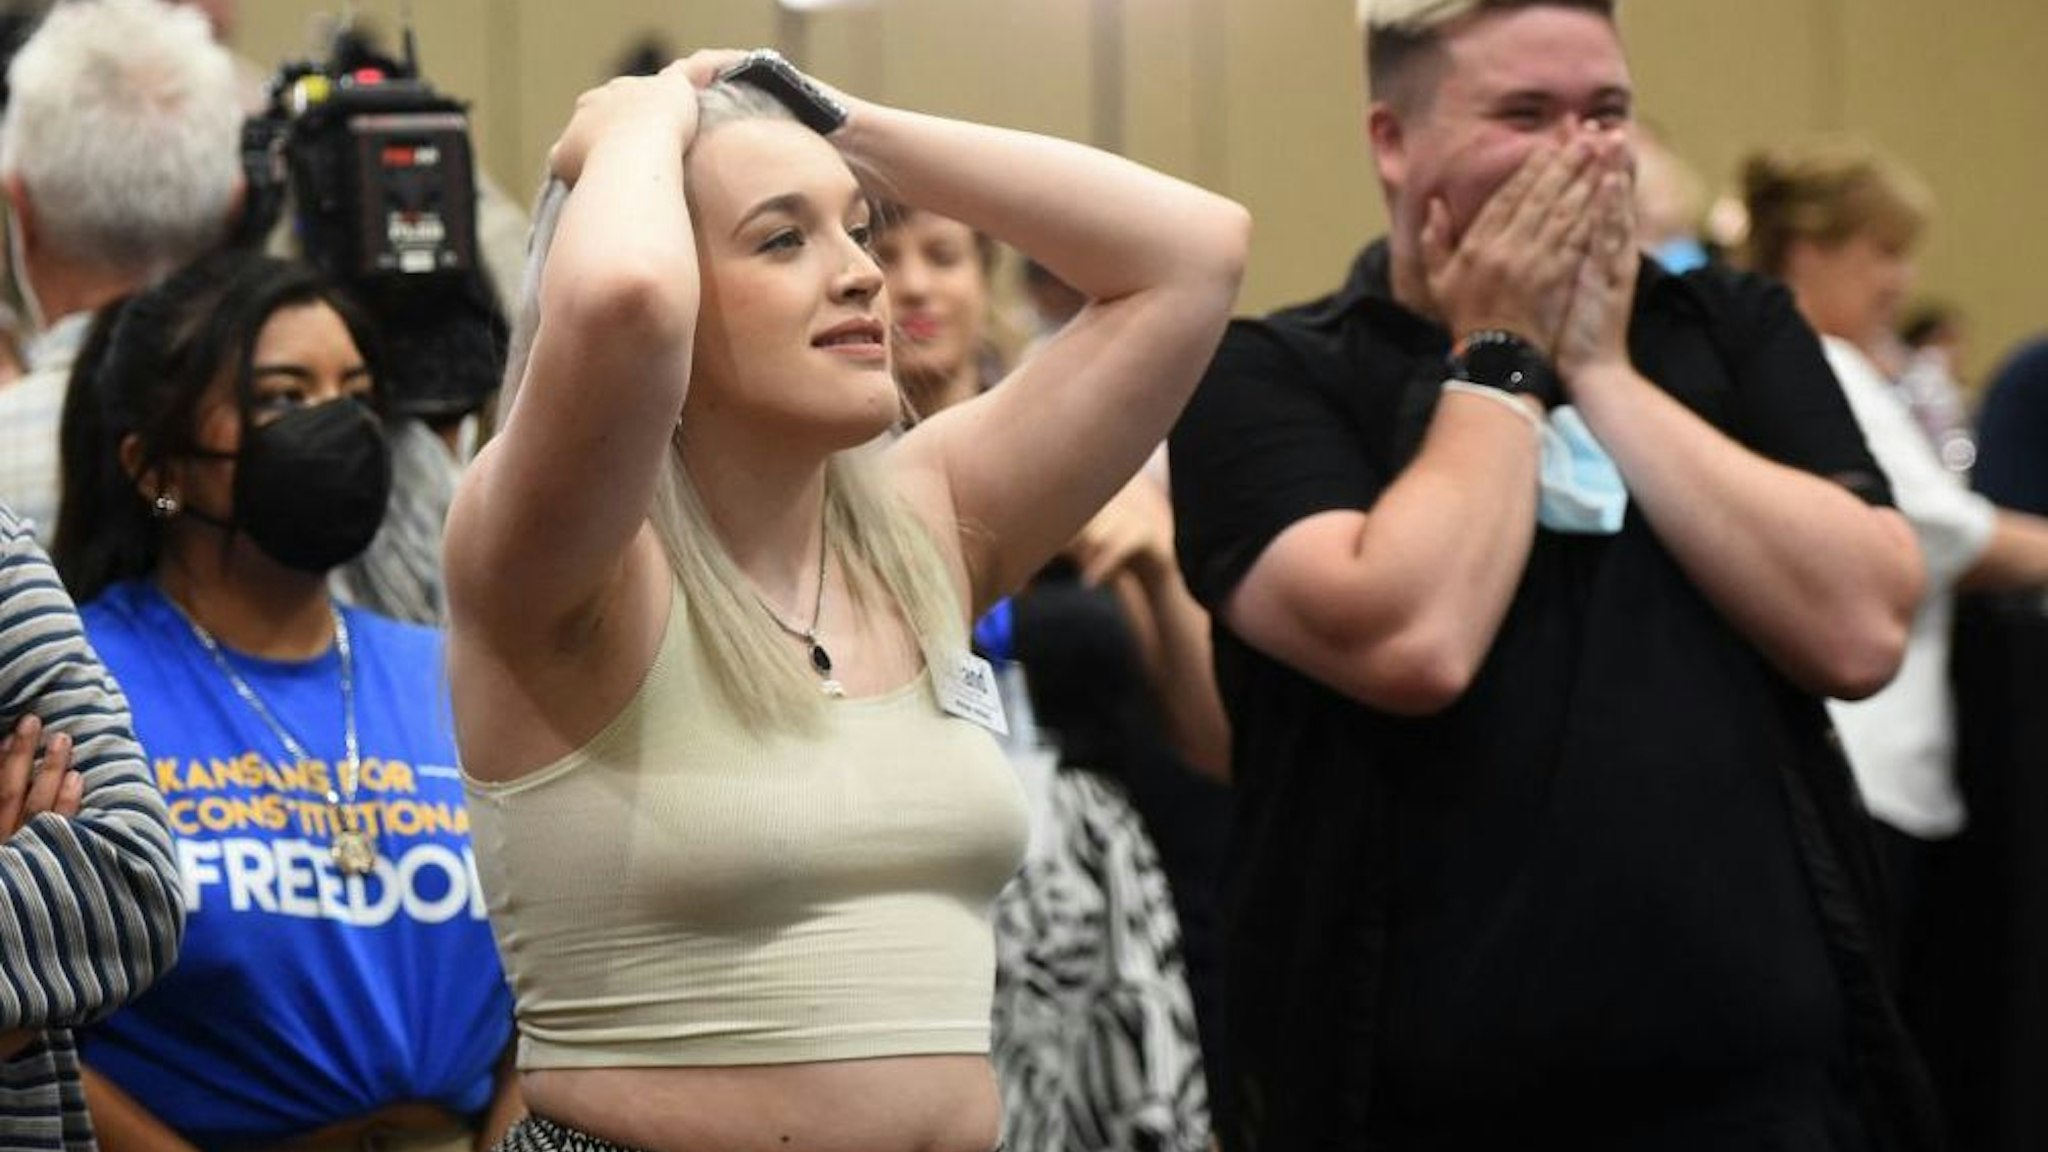 Pro-choice supporters Alie Utley and Joe Moyer (R) react to their county voting against the proposed constitutional amendment during the Kansas for Constitutional Freedom primary election watch party in Overland Park, Kansas August 2, 2022.